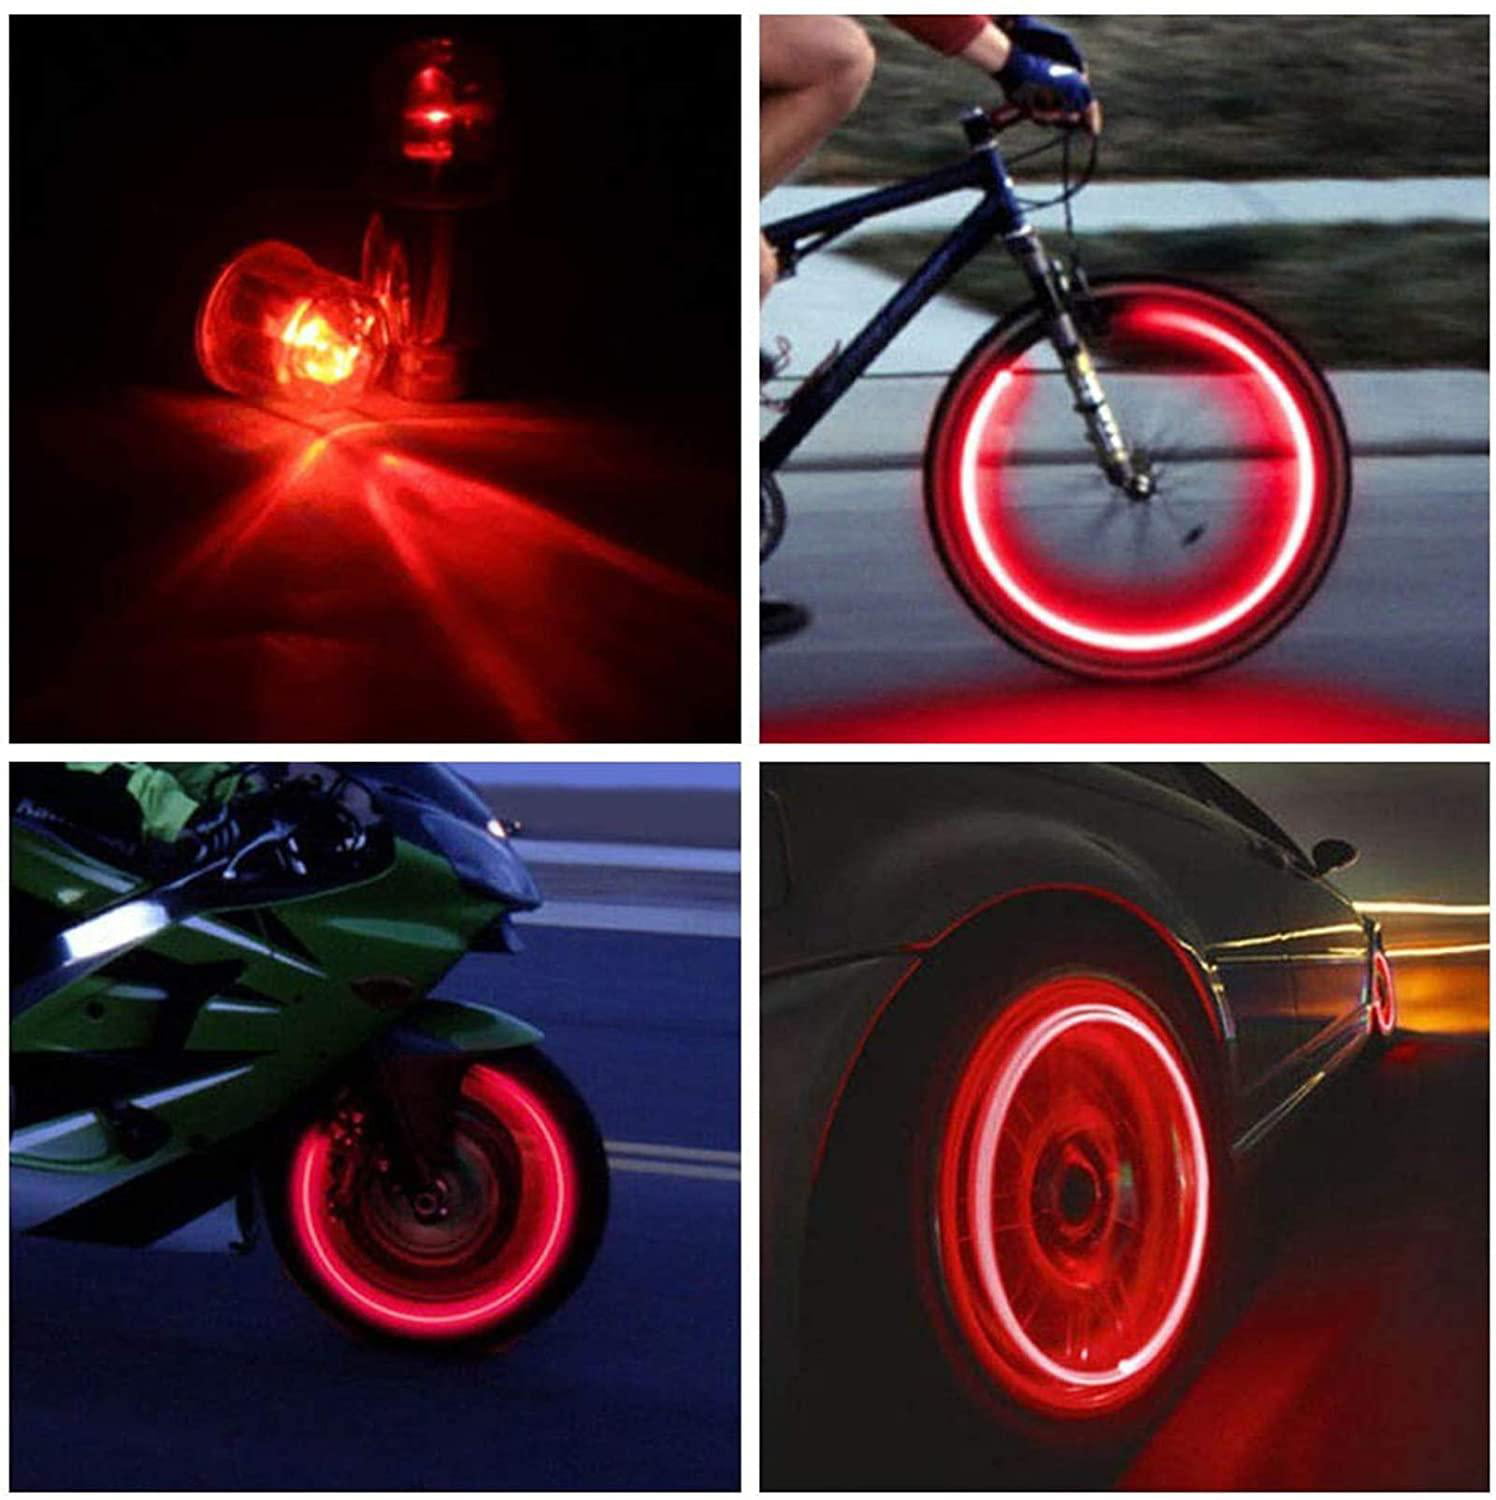 EKYAOMEI 4 Pack LED Automatic Flash Neon Air Valve Light Lamp Tyre Wheel Tire Valve Stem Cap Cover for Cars Cycling Blue 